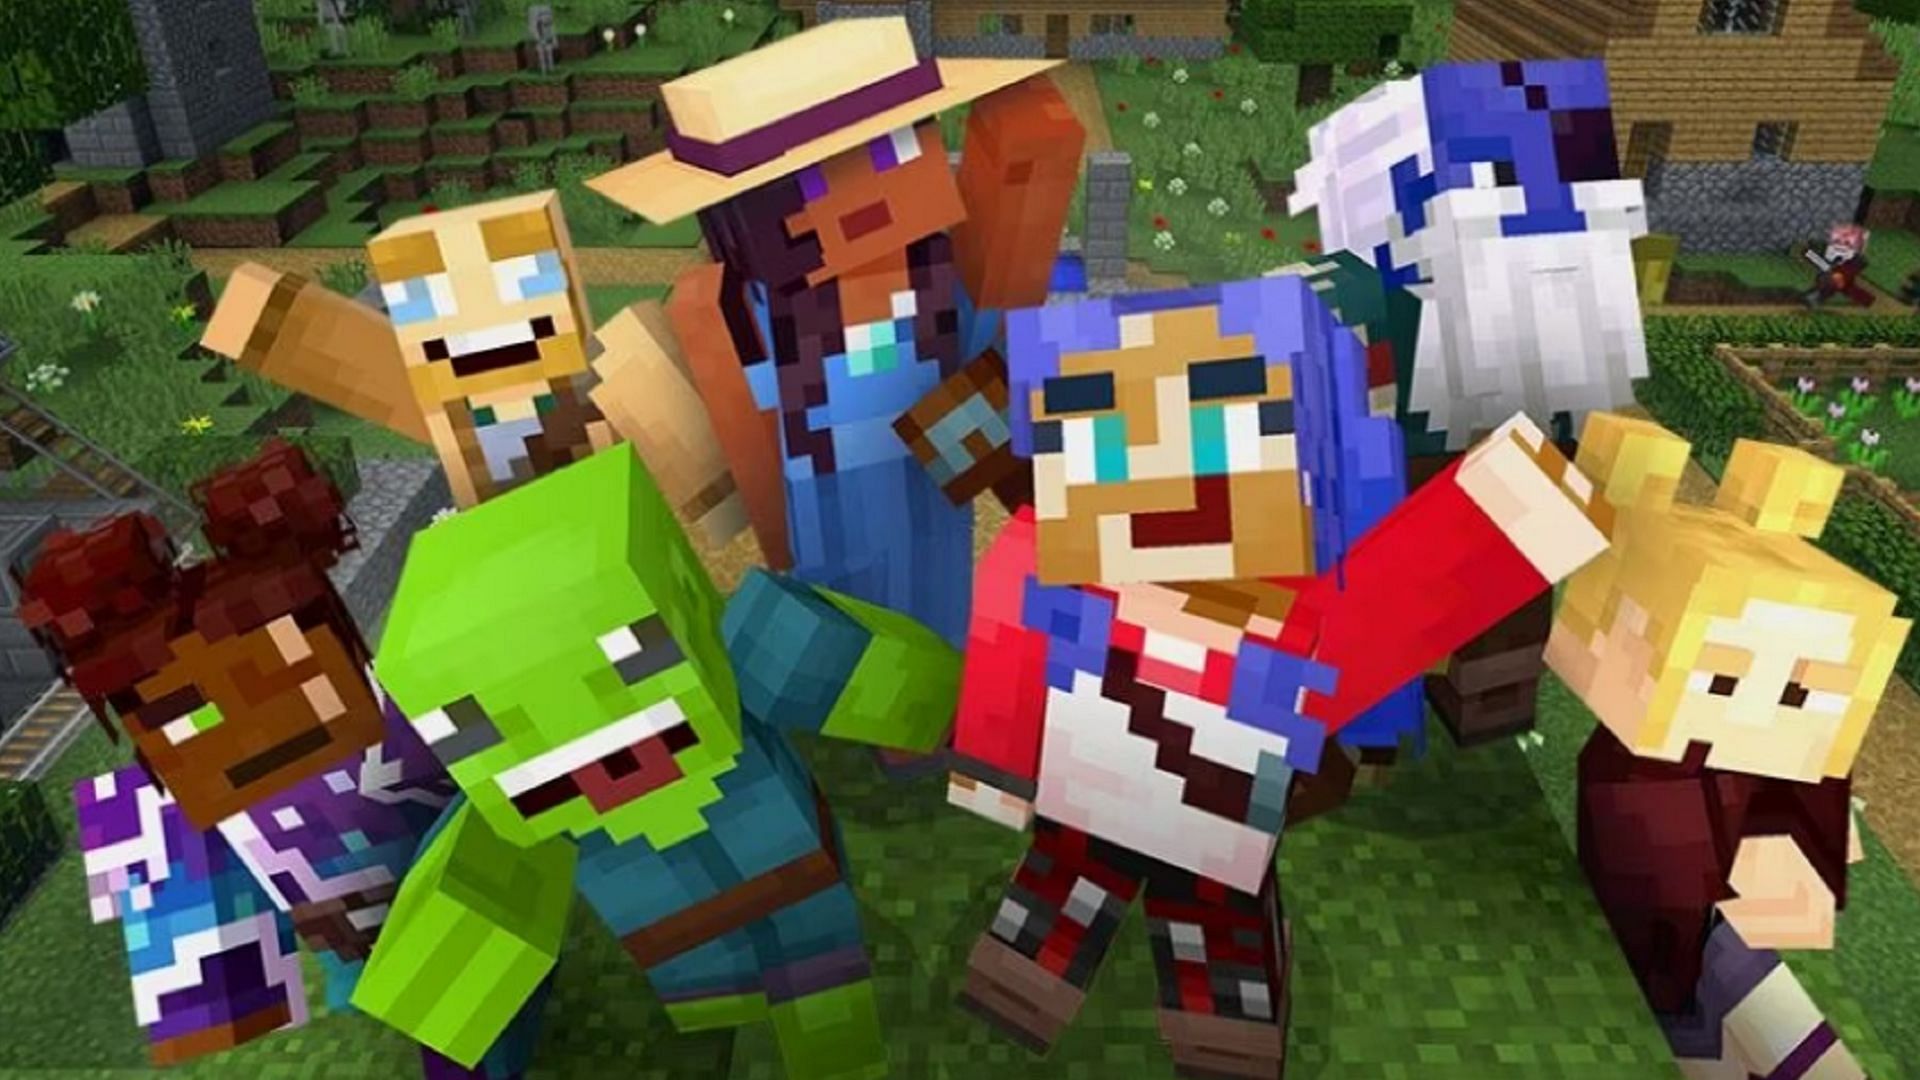 Promotional art for Minecraft